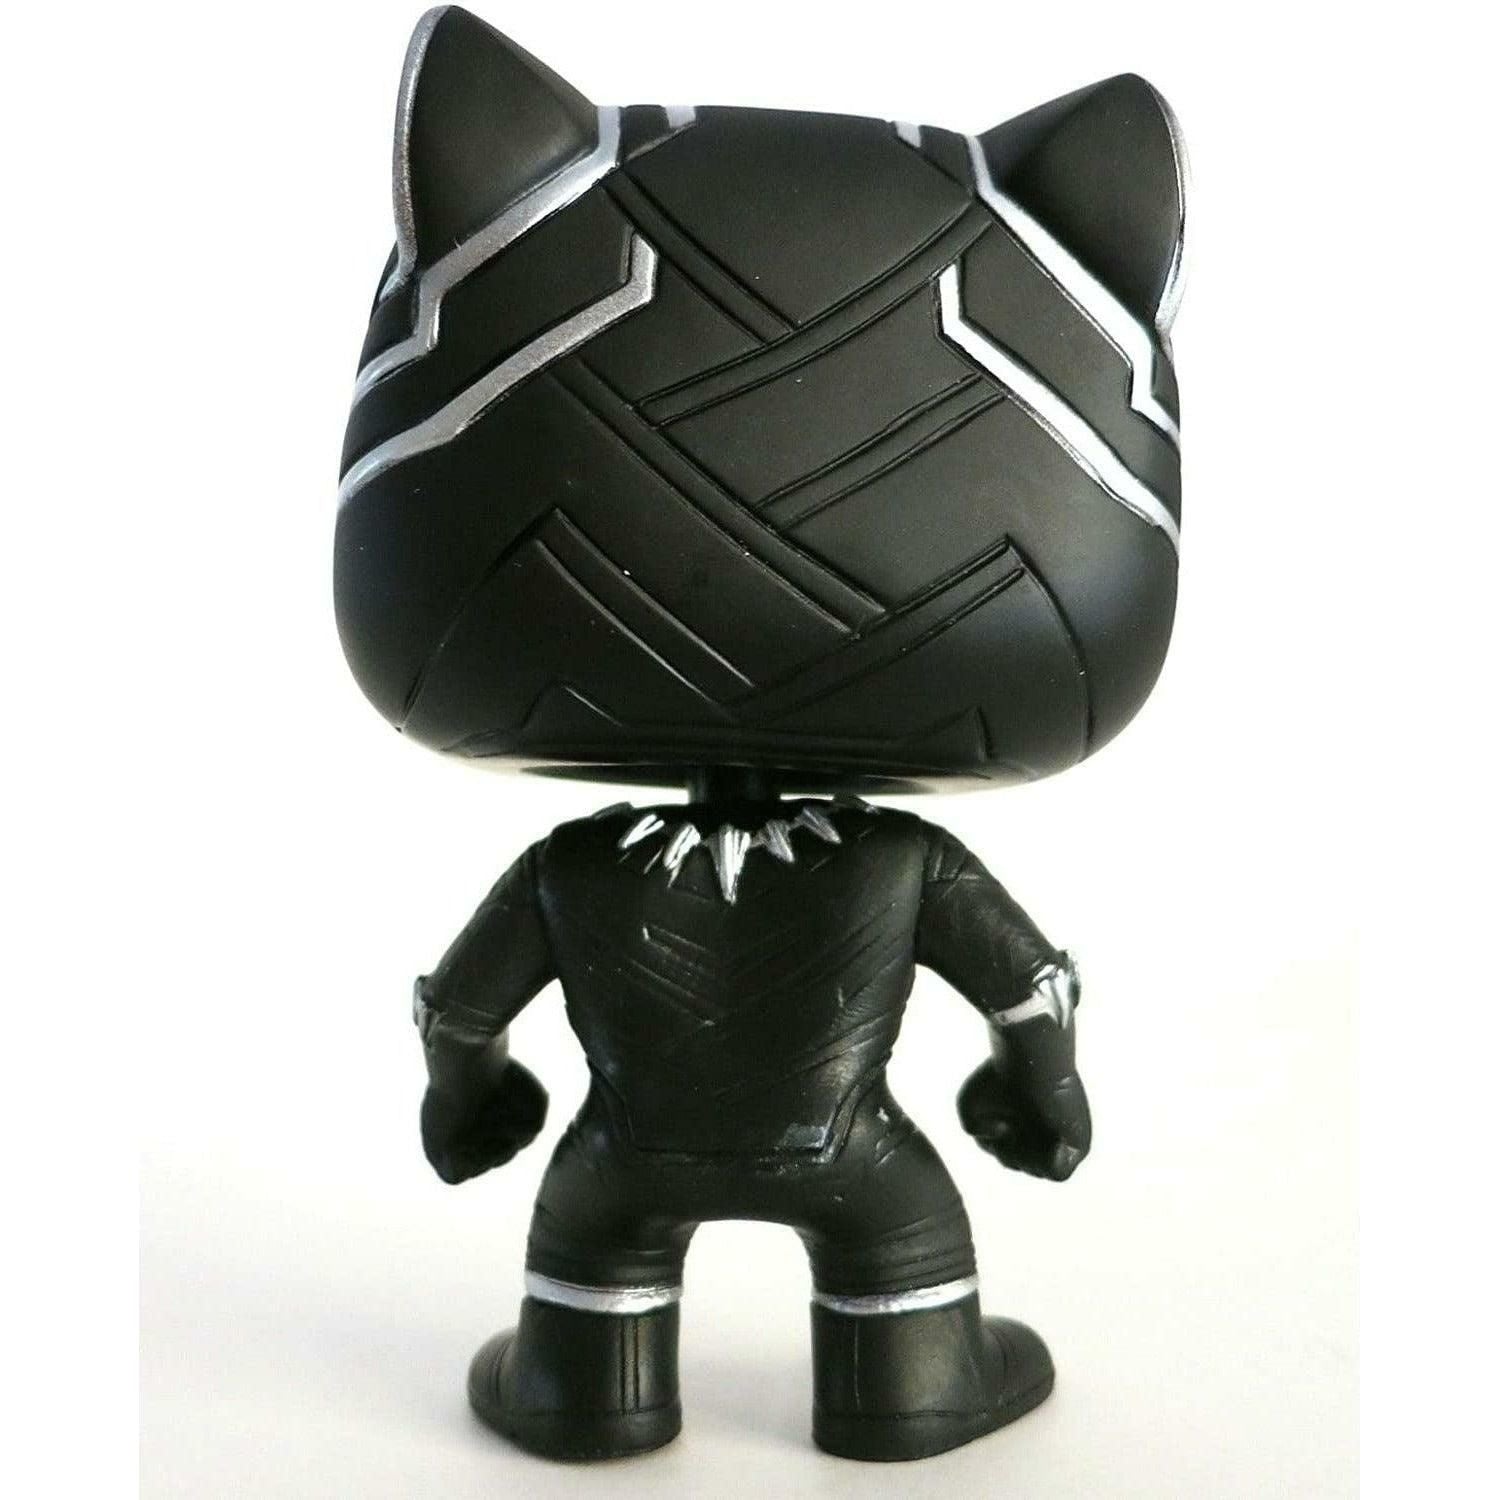 Funko Pop! Marvel: Captain America 3: Civil War Action Figure - Black Panther - BumbleToys - 18+, 5-7 Years, 6+ Years, Black Panther, Boys, Dolls, Funko, OXE, Pre-Order, star wars